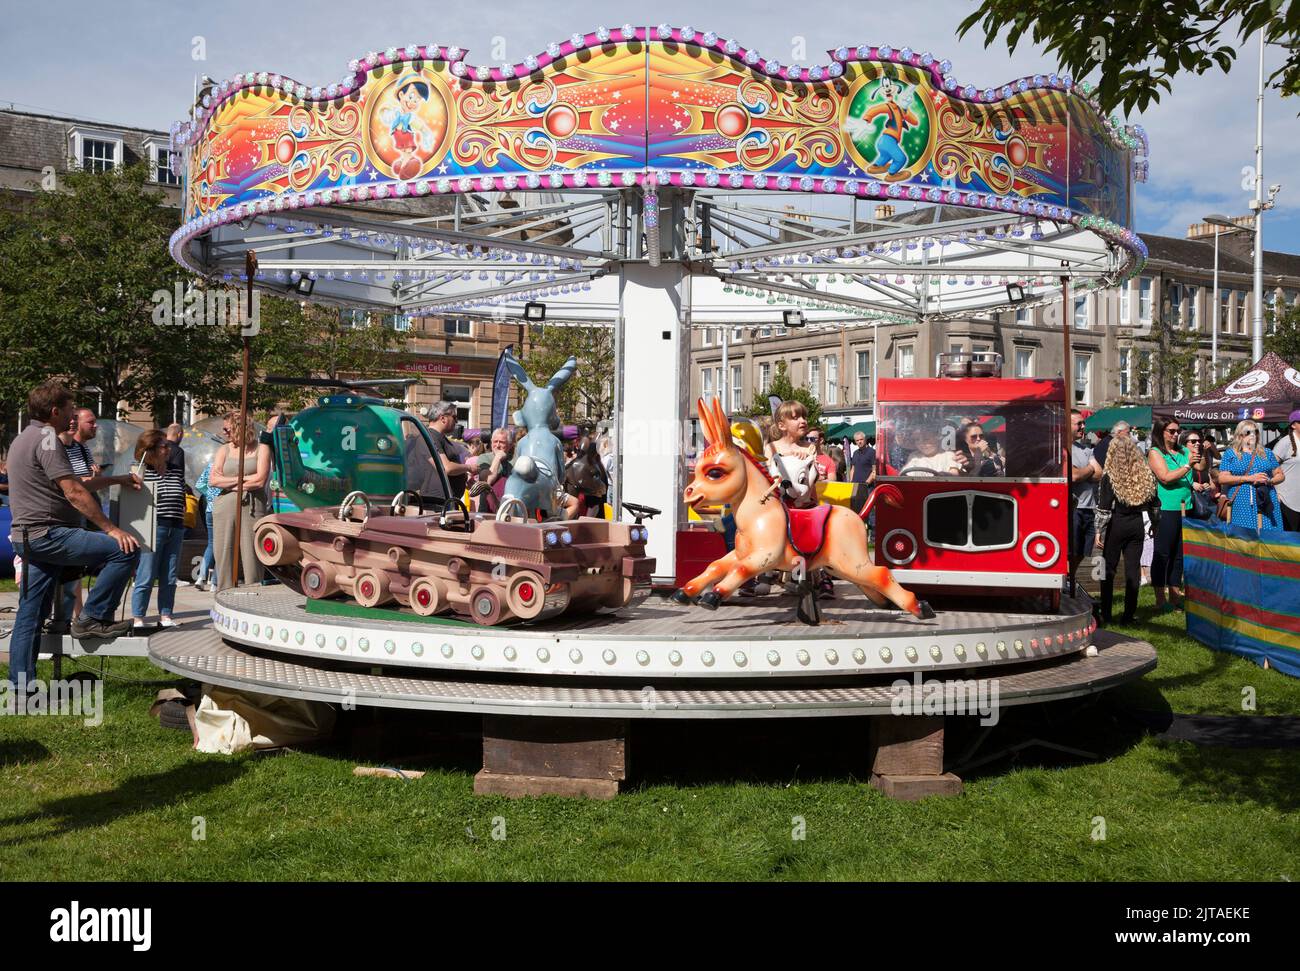 Childrens' roundabout at Fayre, Helensburgh, Scotland Stock Photo